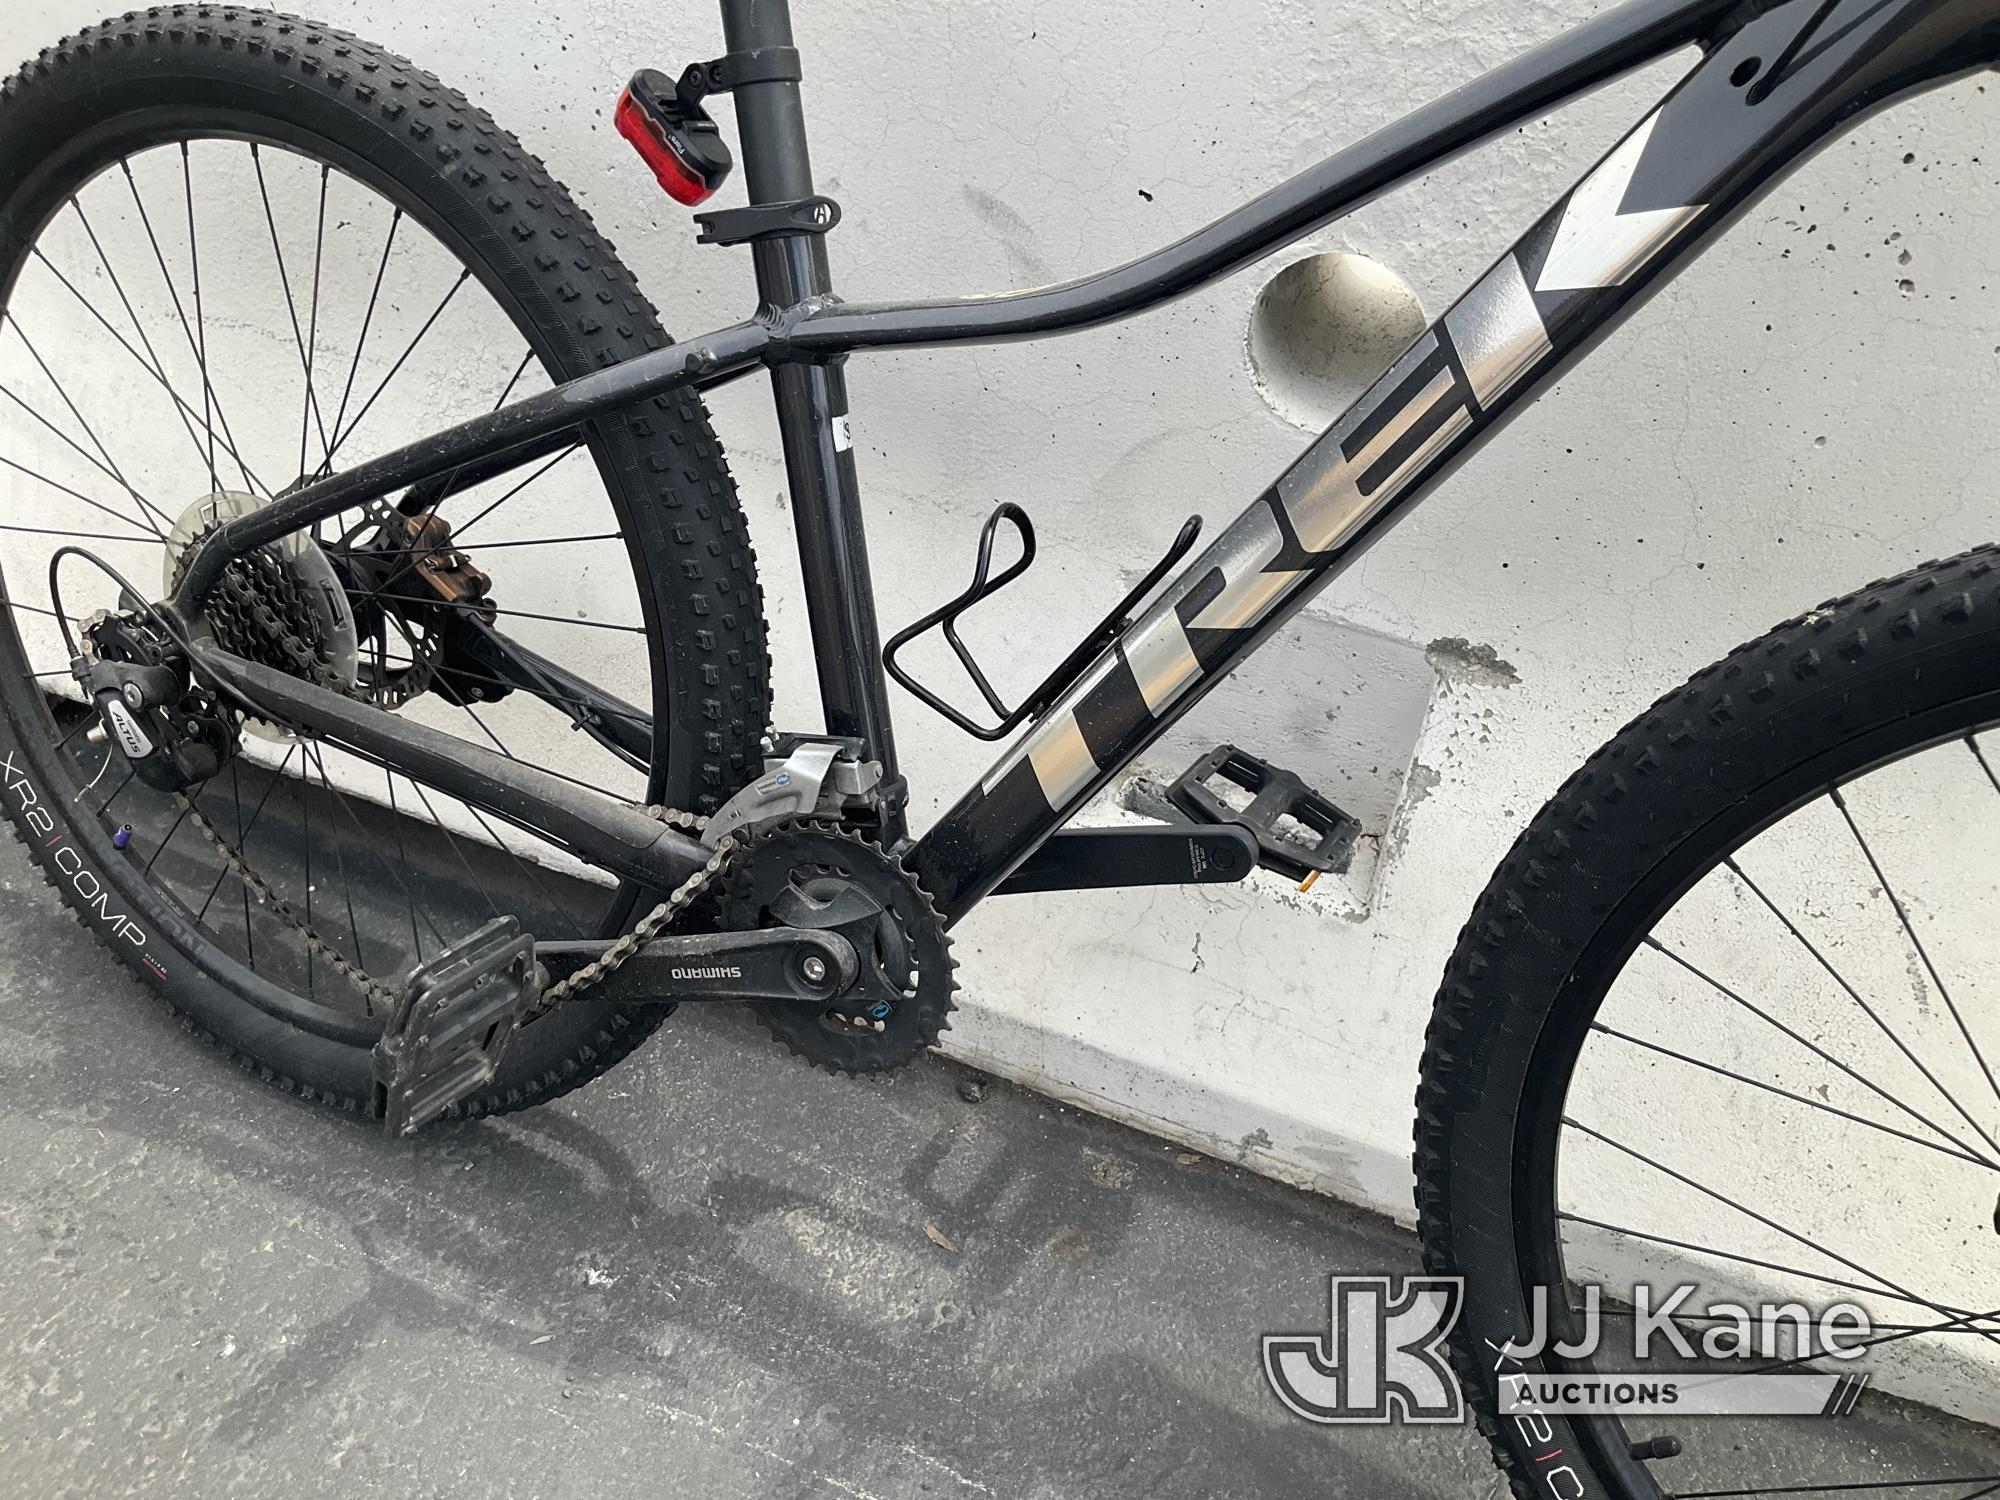 (Jurupa Valley, CA) Trek Bike (Used) NOTE: This unit is being sold AS IS/WHERE IS via Timed Auction